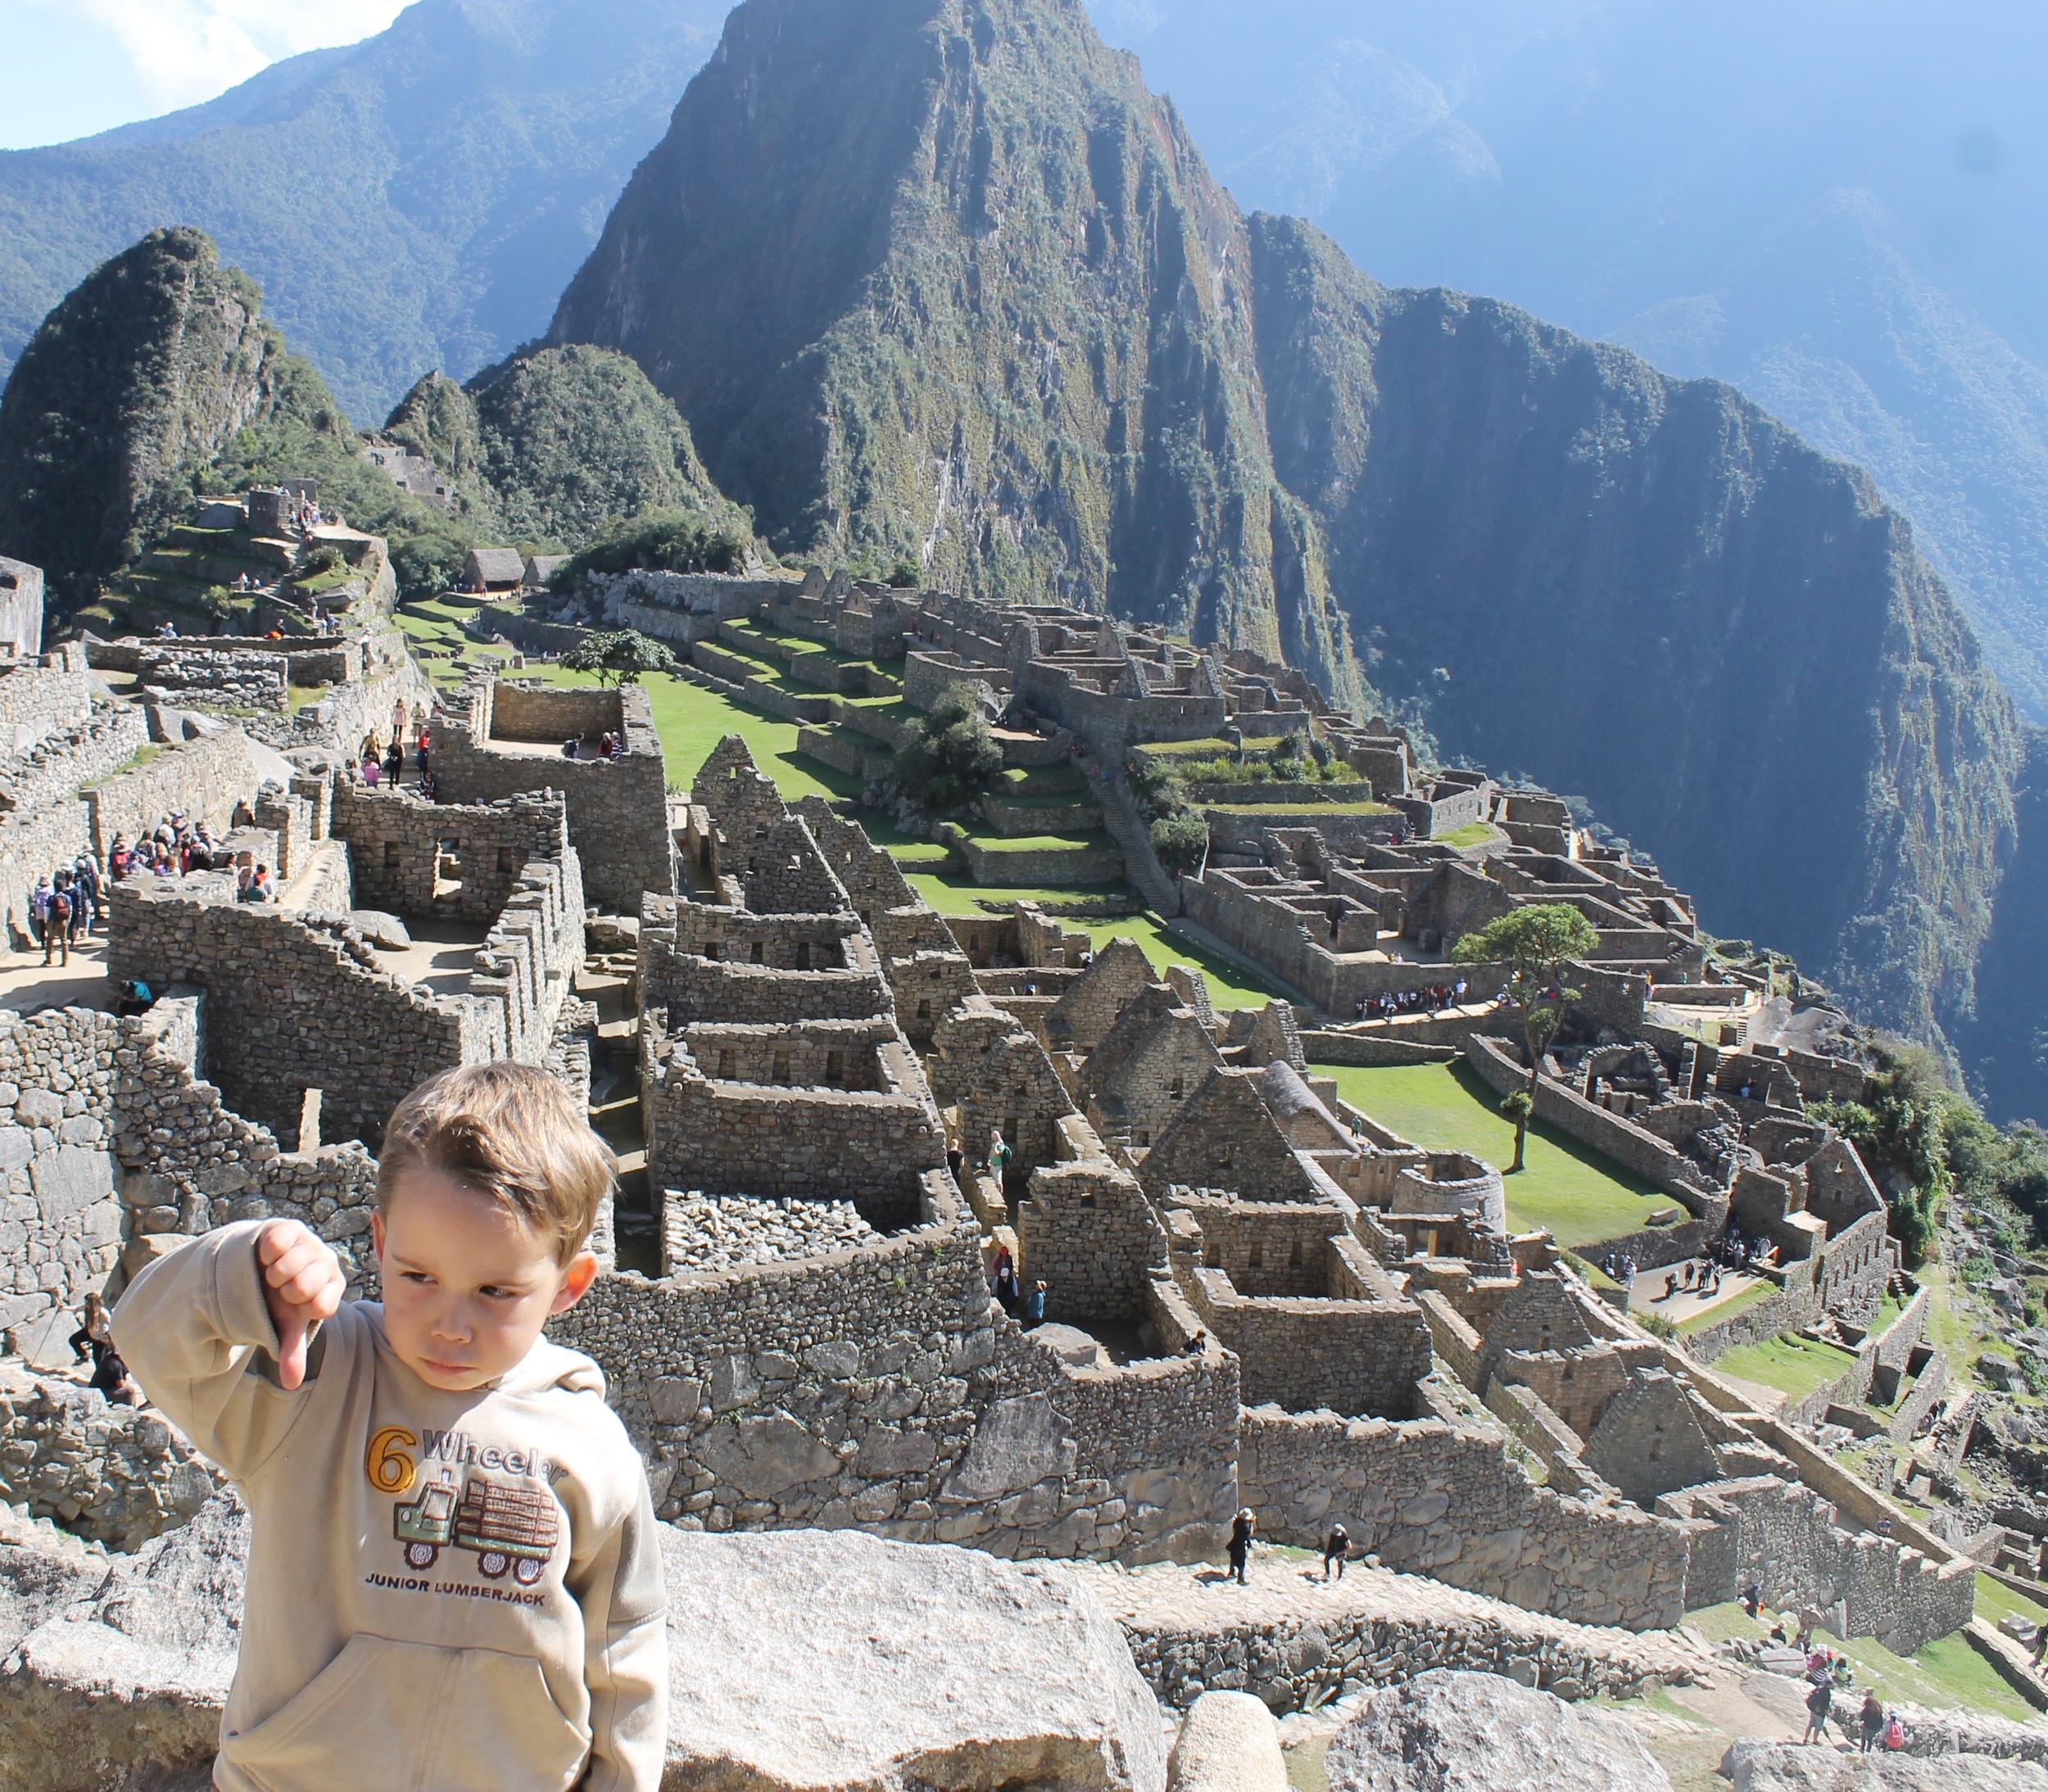  Kaleb's impression of Machu Picchu! He wasn't quite so impressed by all the walking around big stones and being hauled up the hills!&nbsp; 